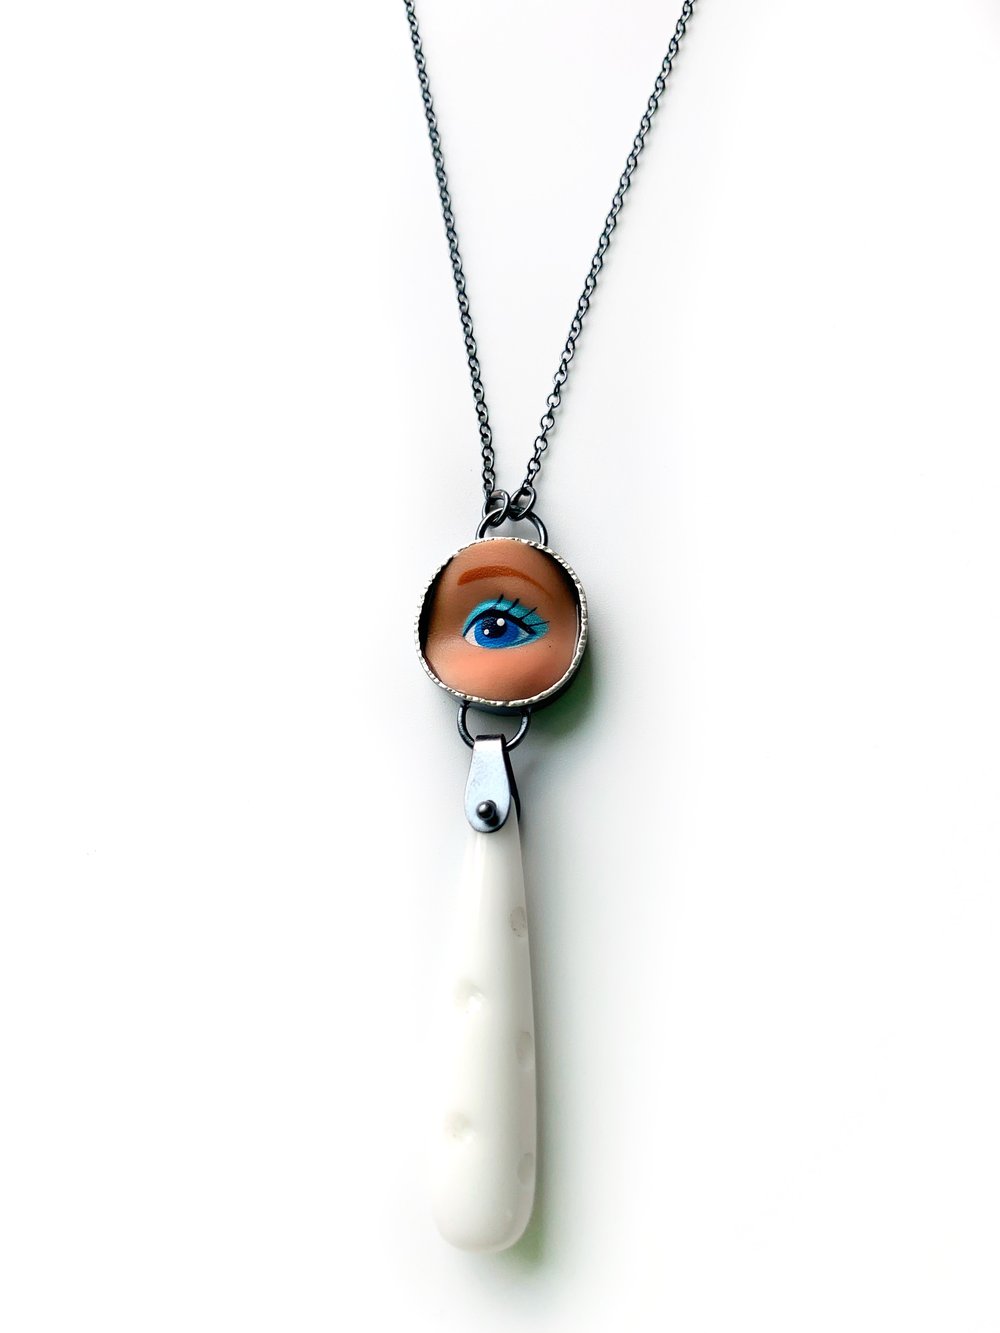 Image of Eye Necklace with White Polka Dot Drop